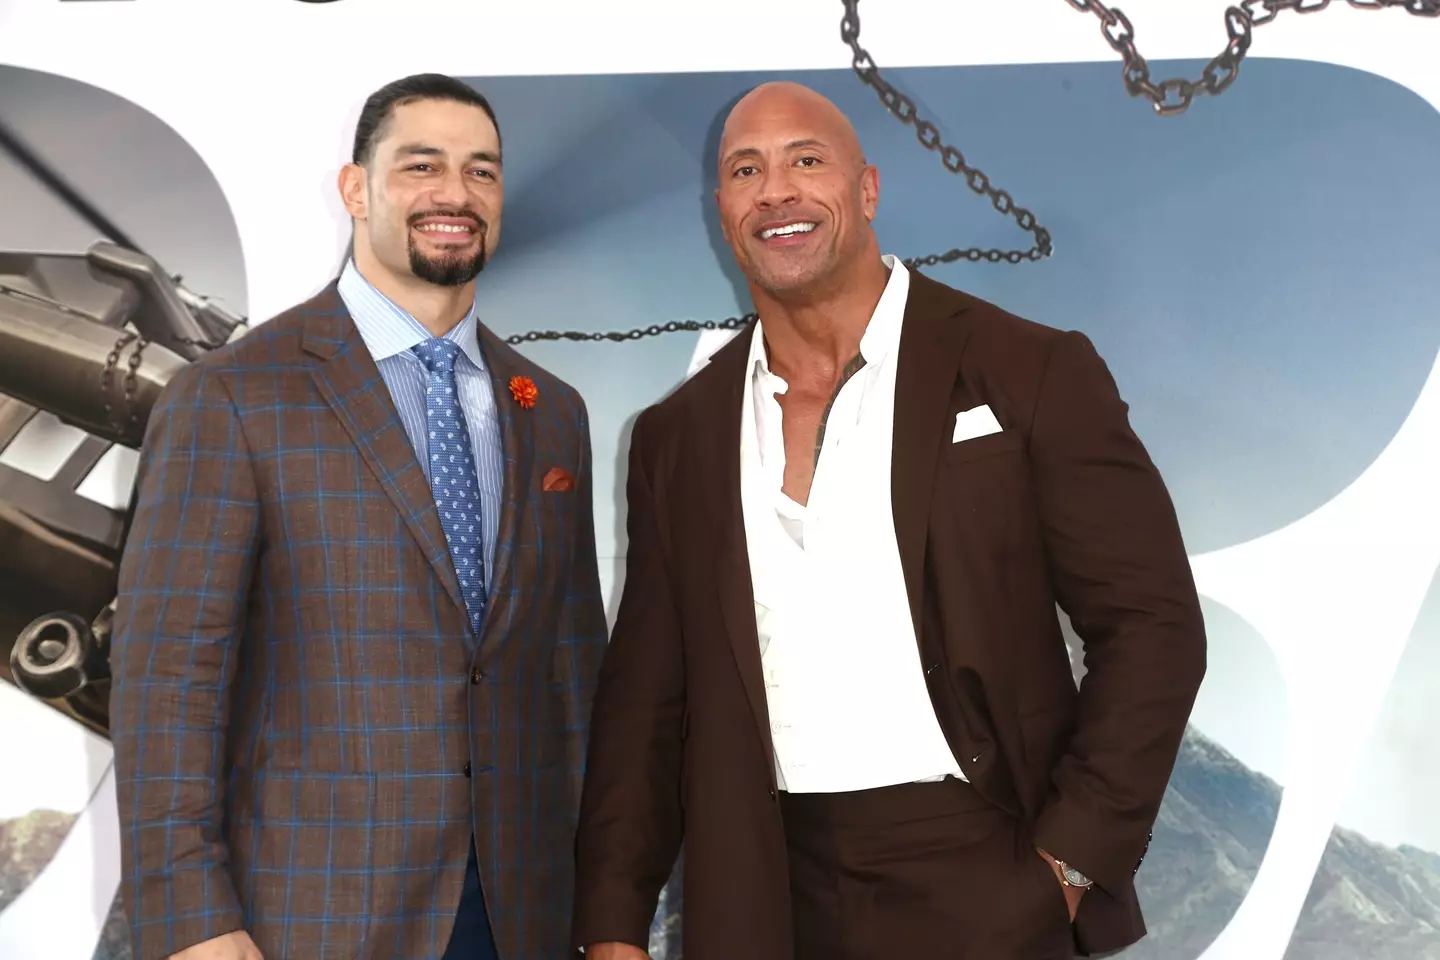 The Rock's mention of 'The Head of the Table' was a reference to Roman Reigns.